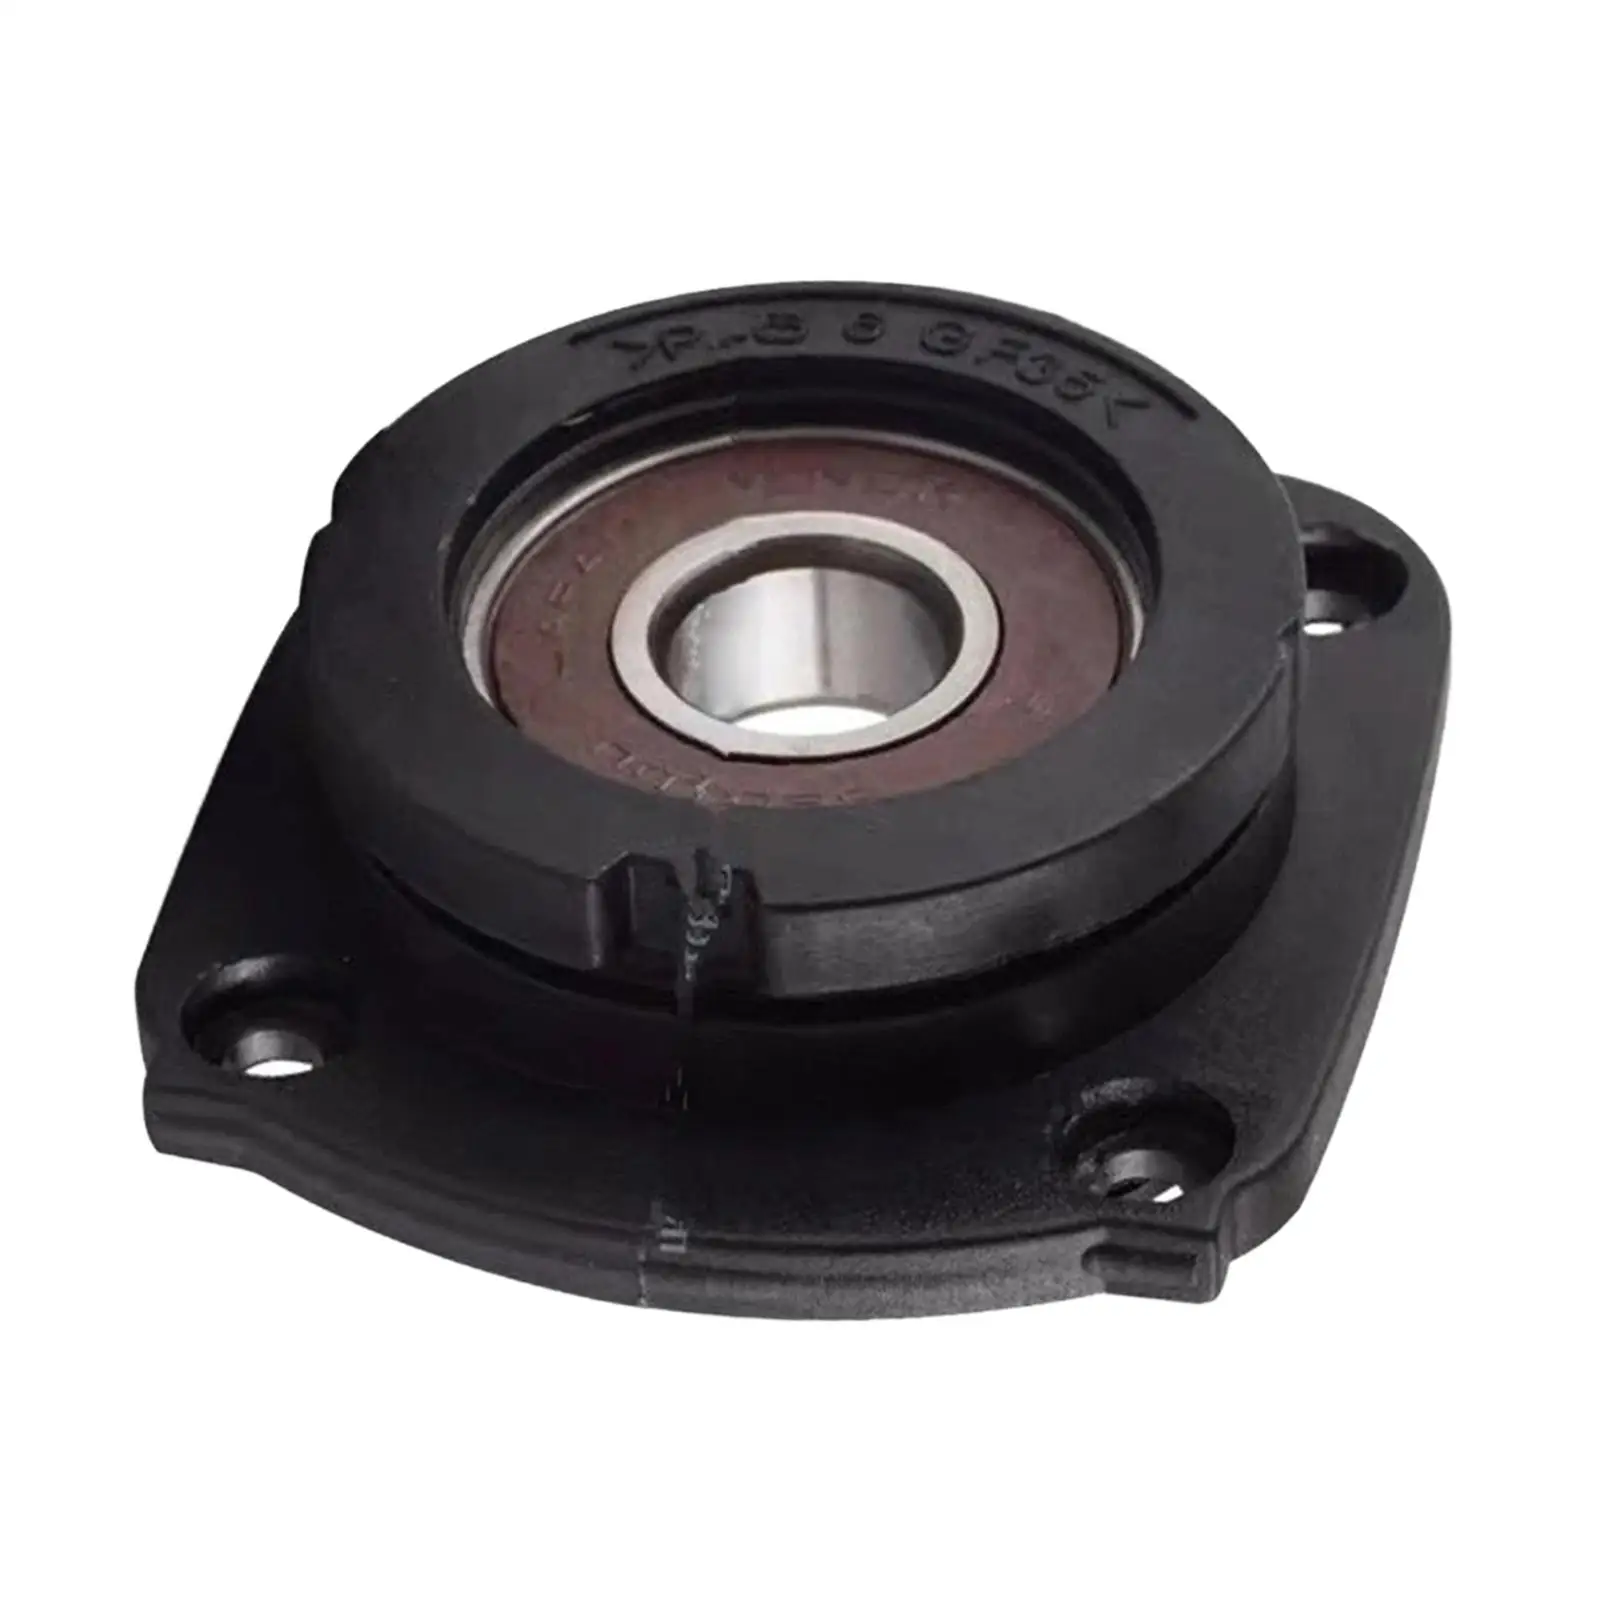 Spindle Bearing Block Cover High Strength Replacement Pillow Block Bearing Cover for Bosch Gws6 Gws 8-125 Gws 8-100 Gws 6-115